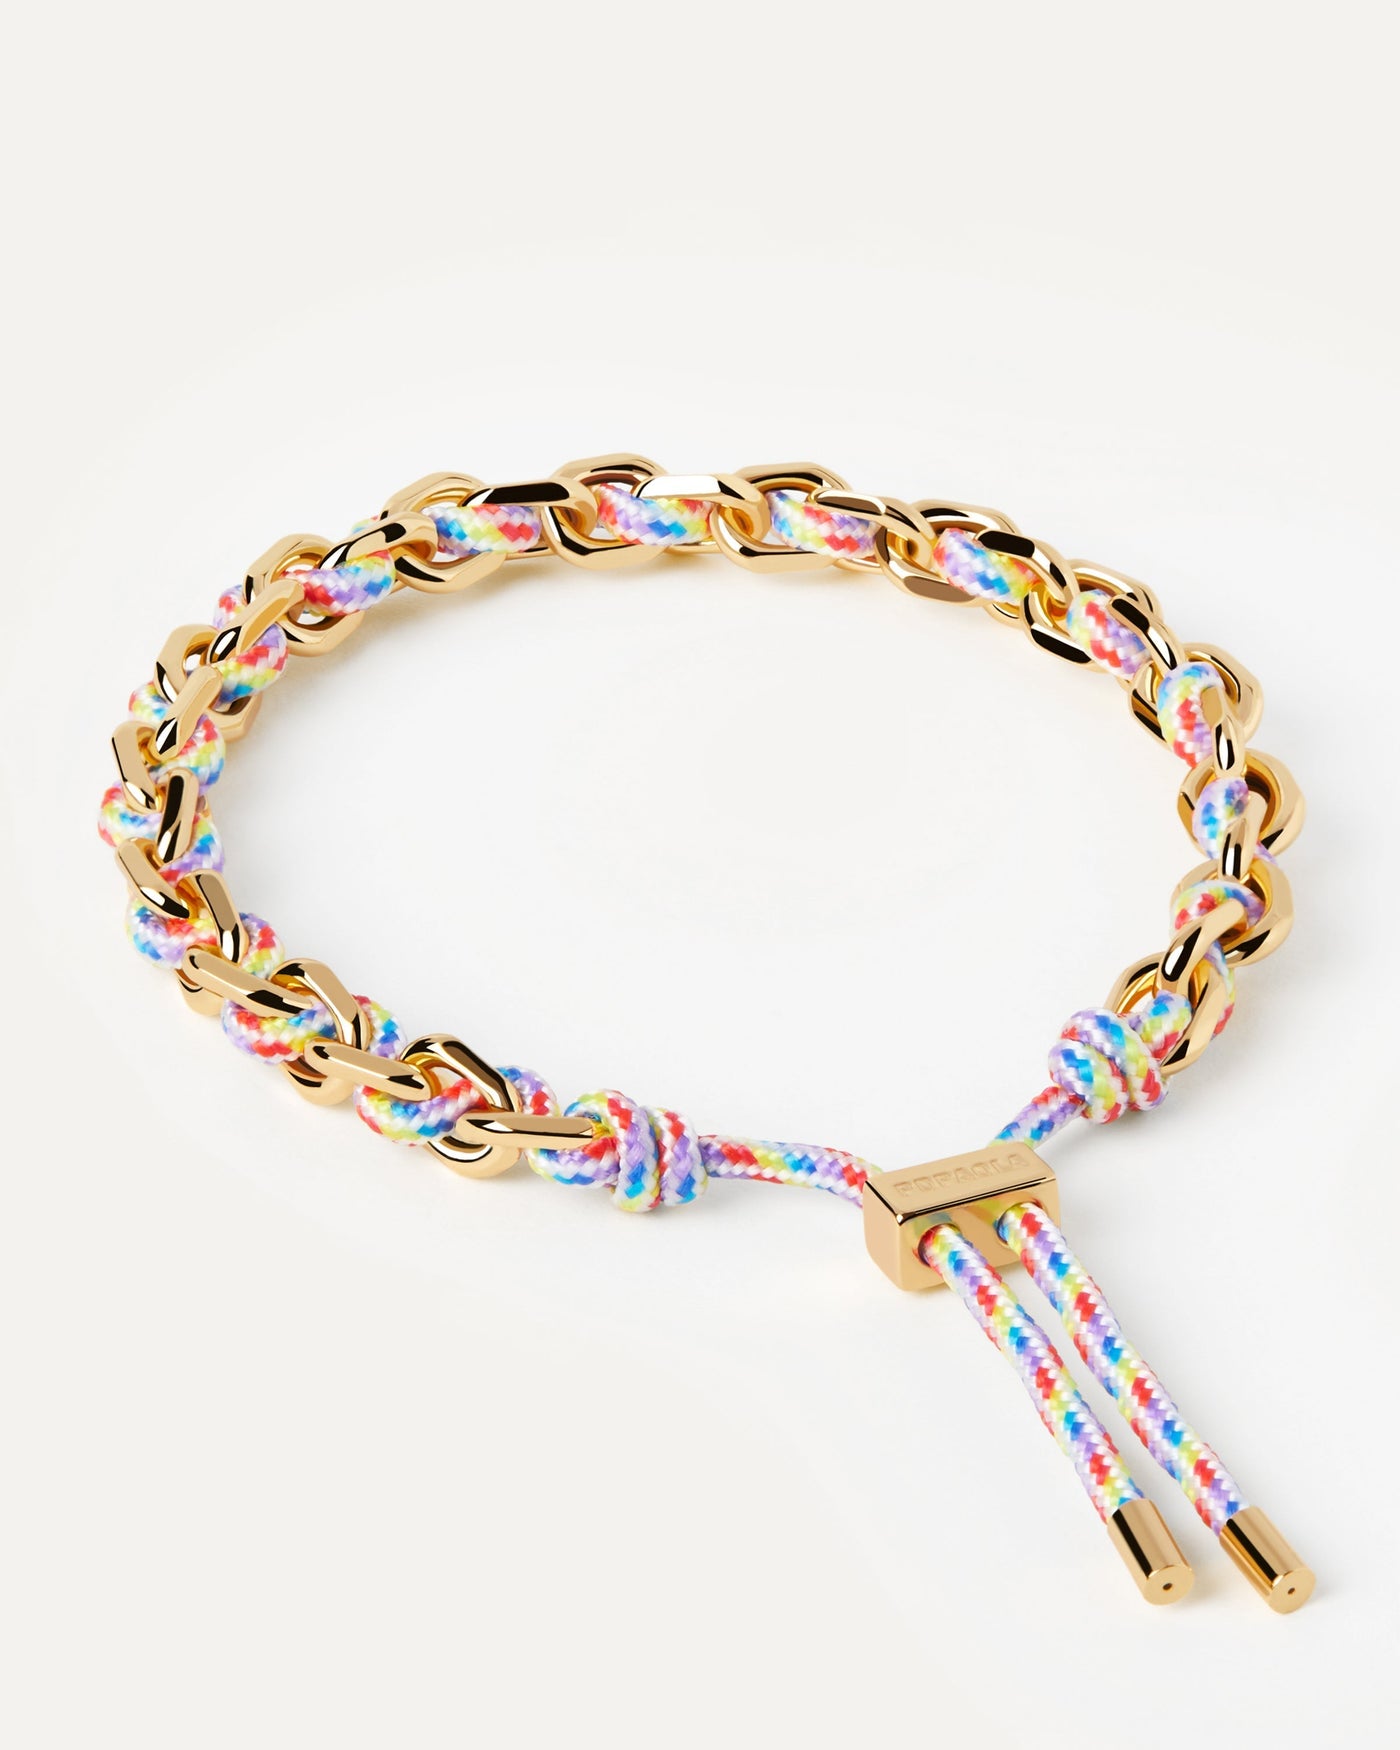 2023 Selection | Prisma Rope and Chain Bracelet. Golden chain bracelet with a multicolor rope adjustable sliding clasp. Get the latest arrival from PDPAOLA. Place your order safely and get this Best Seller. Free Shipping.